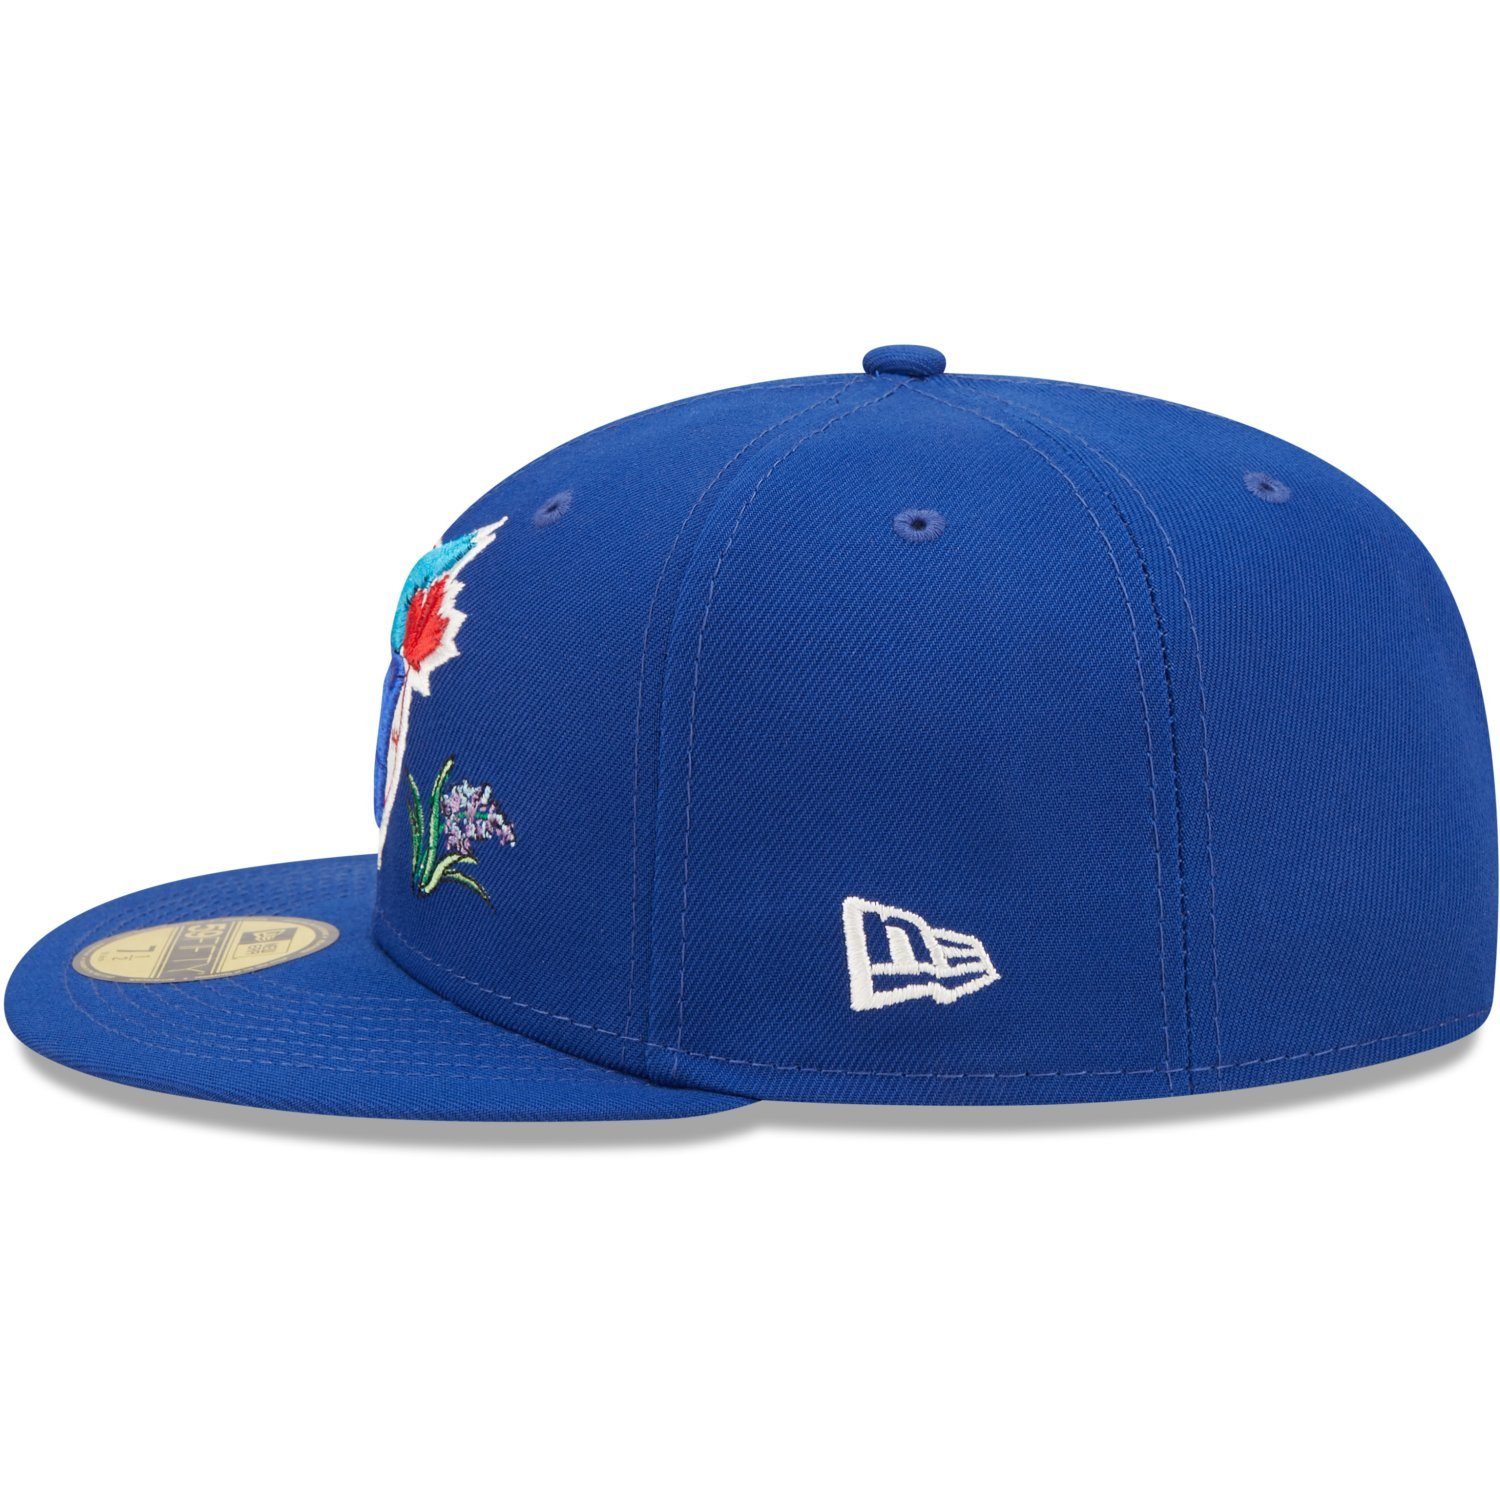 New Era Fitted Cap 59Fifty FLORAL blau Toronto WATER Jays